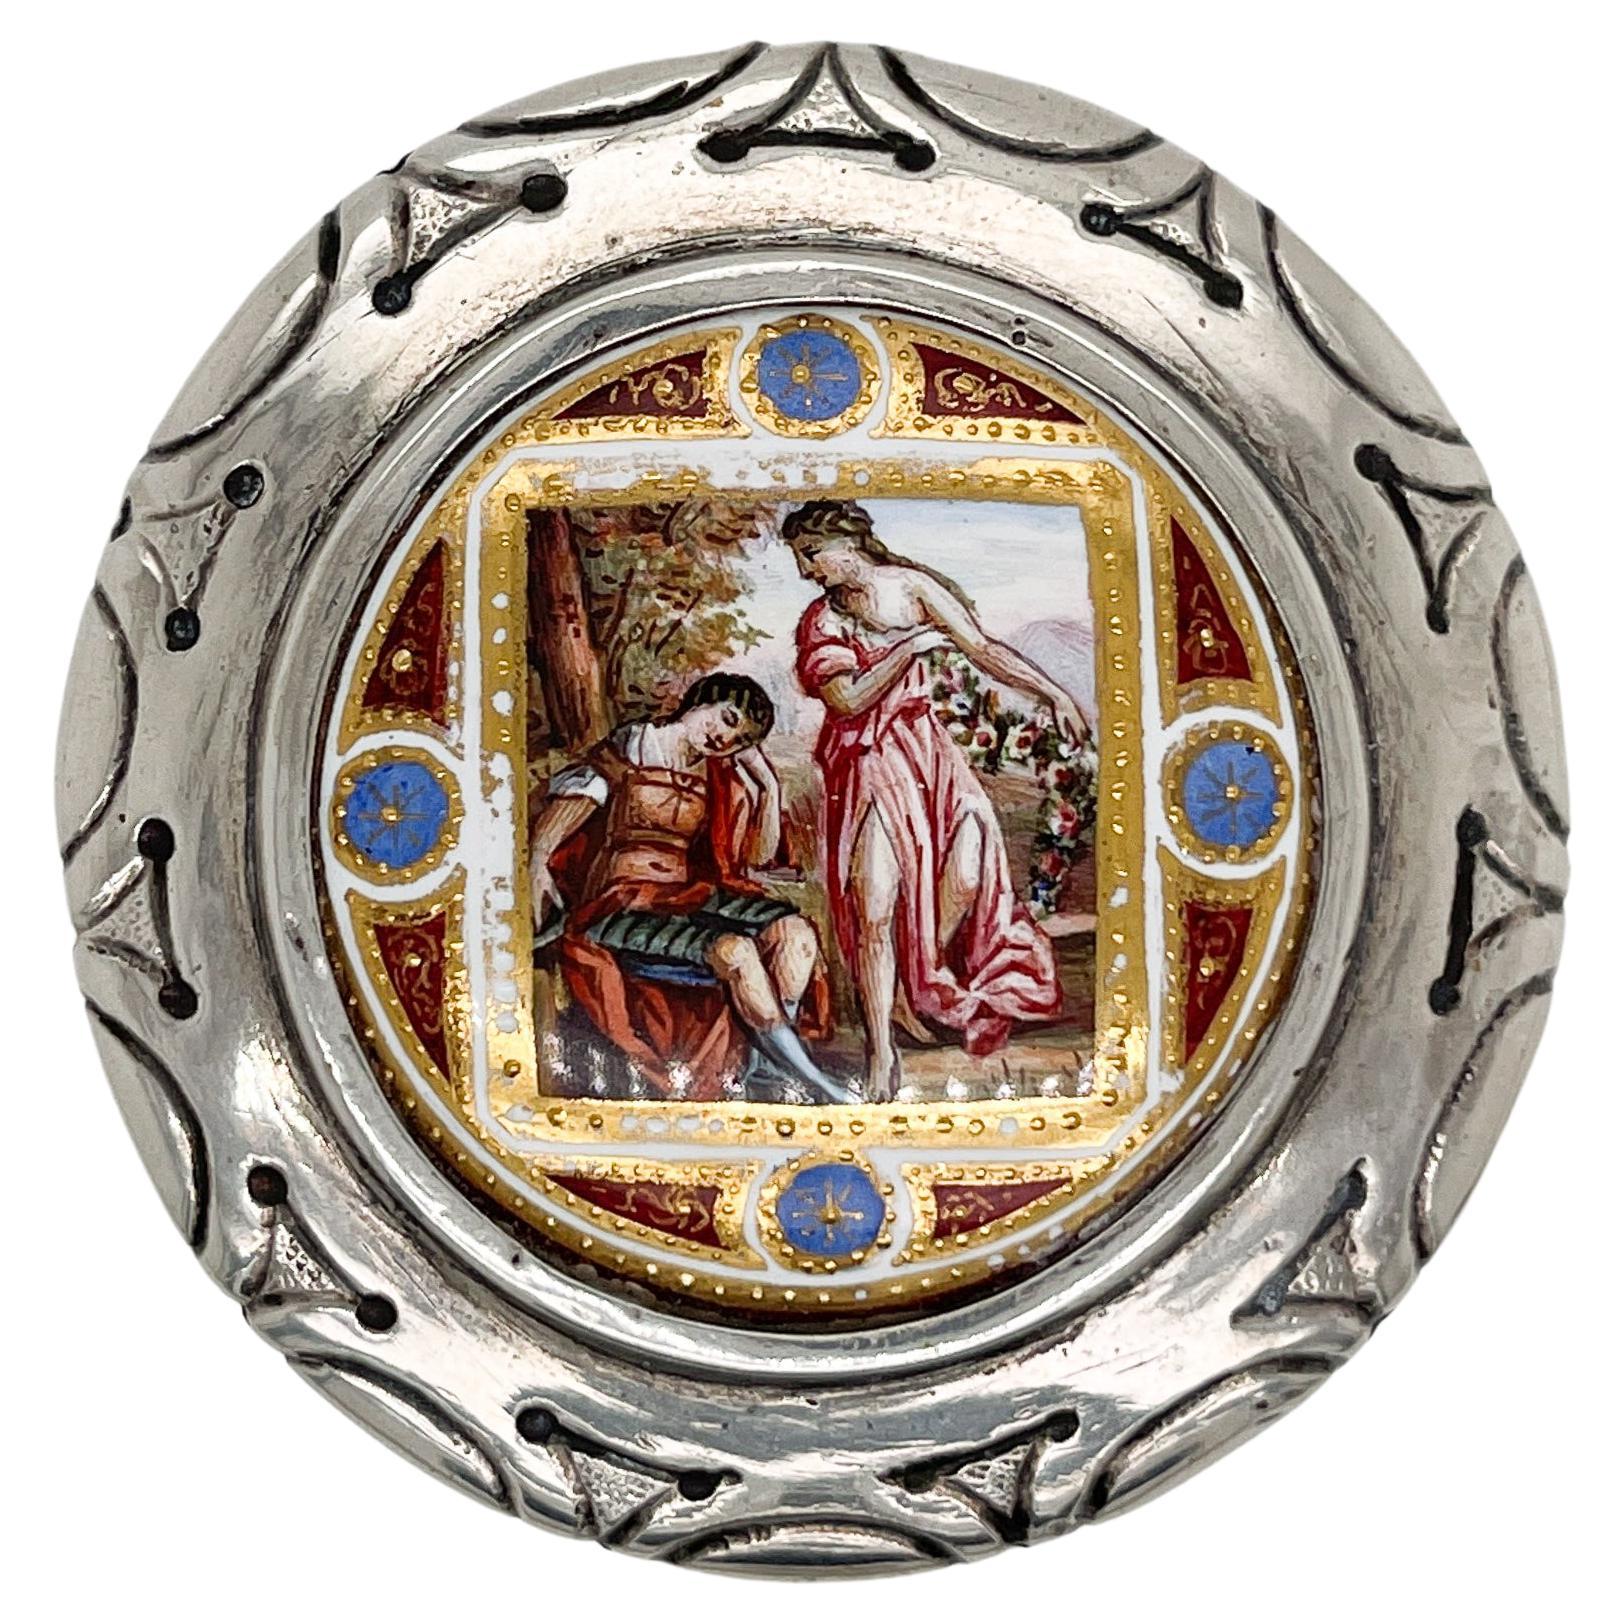 A fine Austrian silver & enamel snuff or patch box.

With a small enameled and gilt plaque set in the center of the top.

The plaque has a classical scene to the central cartouche and jeweled decoration throughout.

Simply a wonderful early